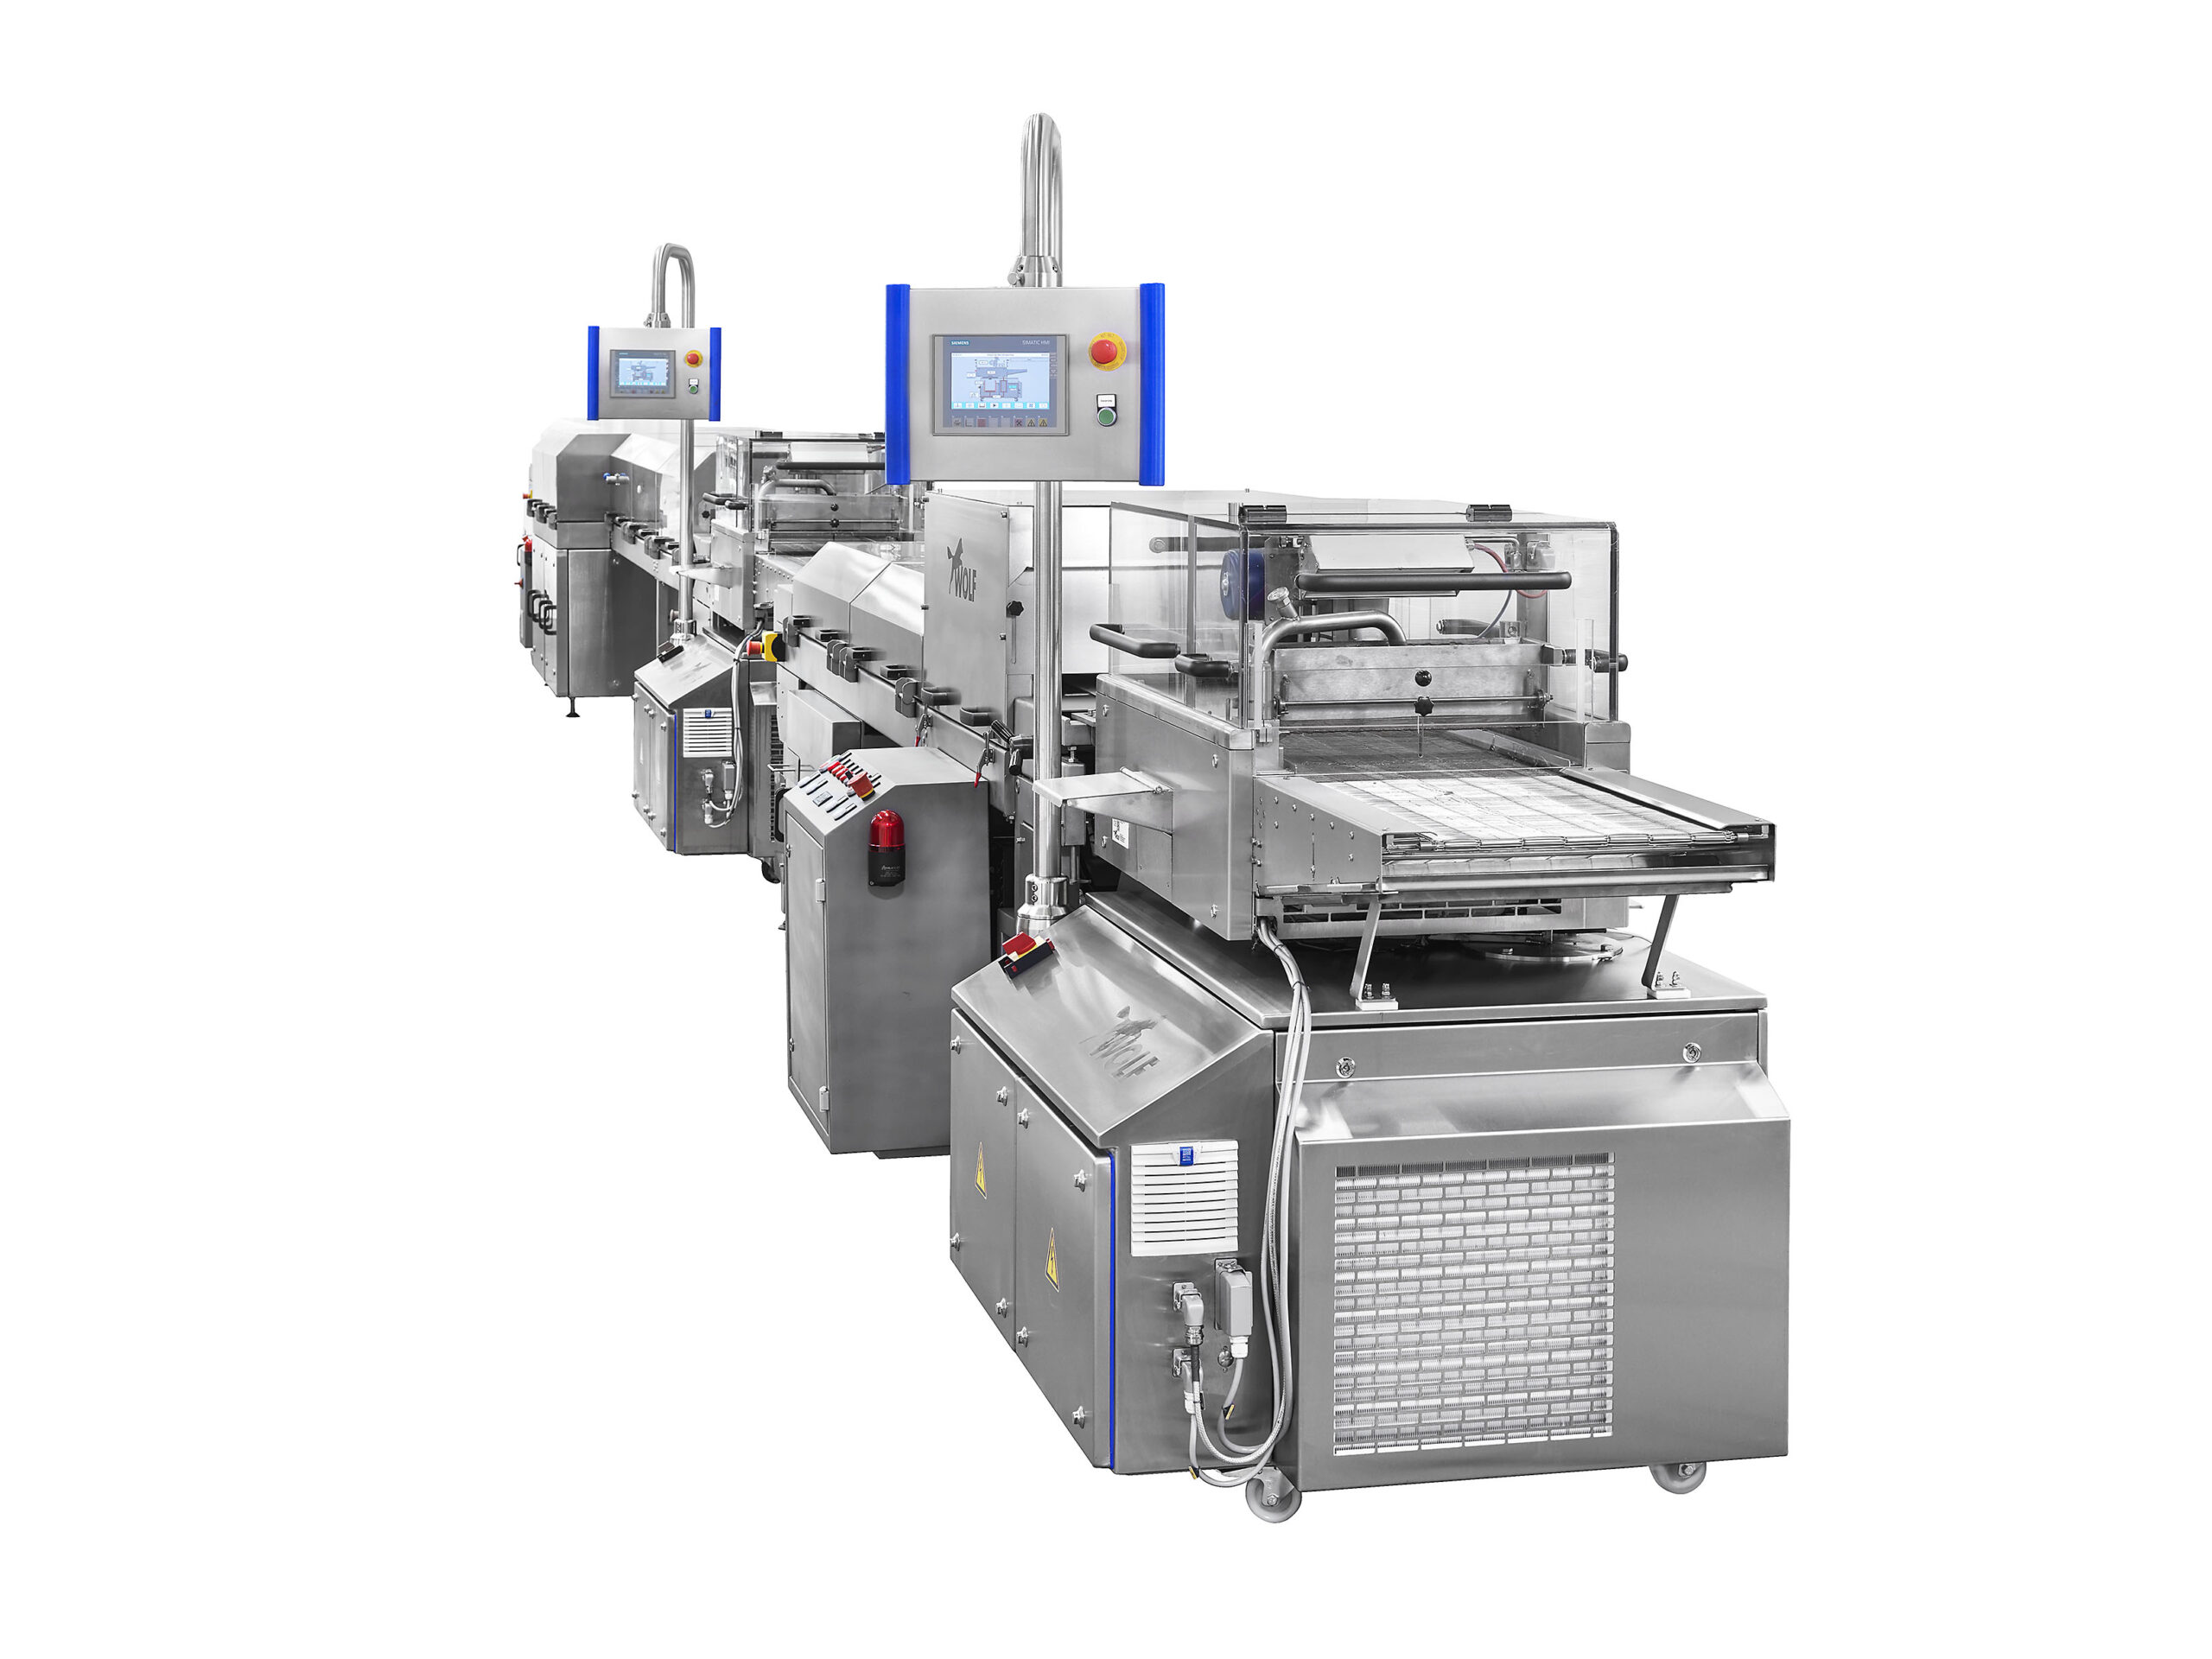 How Upgrading To A Knobel Chocolate Depositor Machine Can Take Your Chocolate Production Business To The Next Level